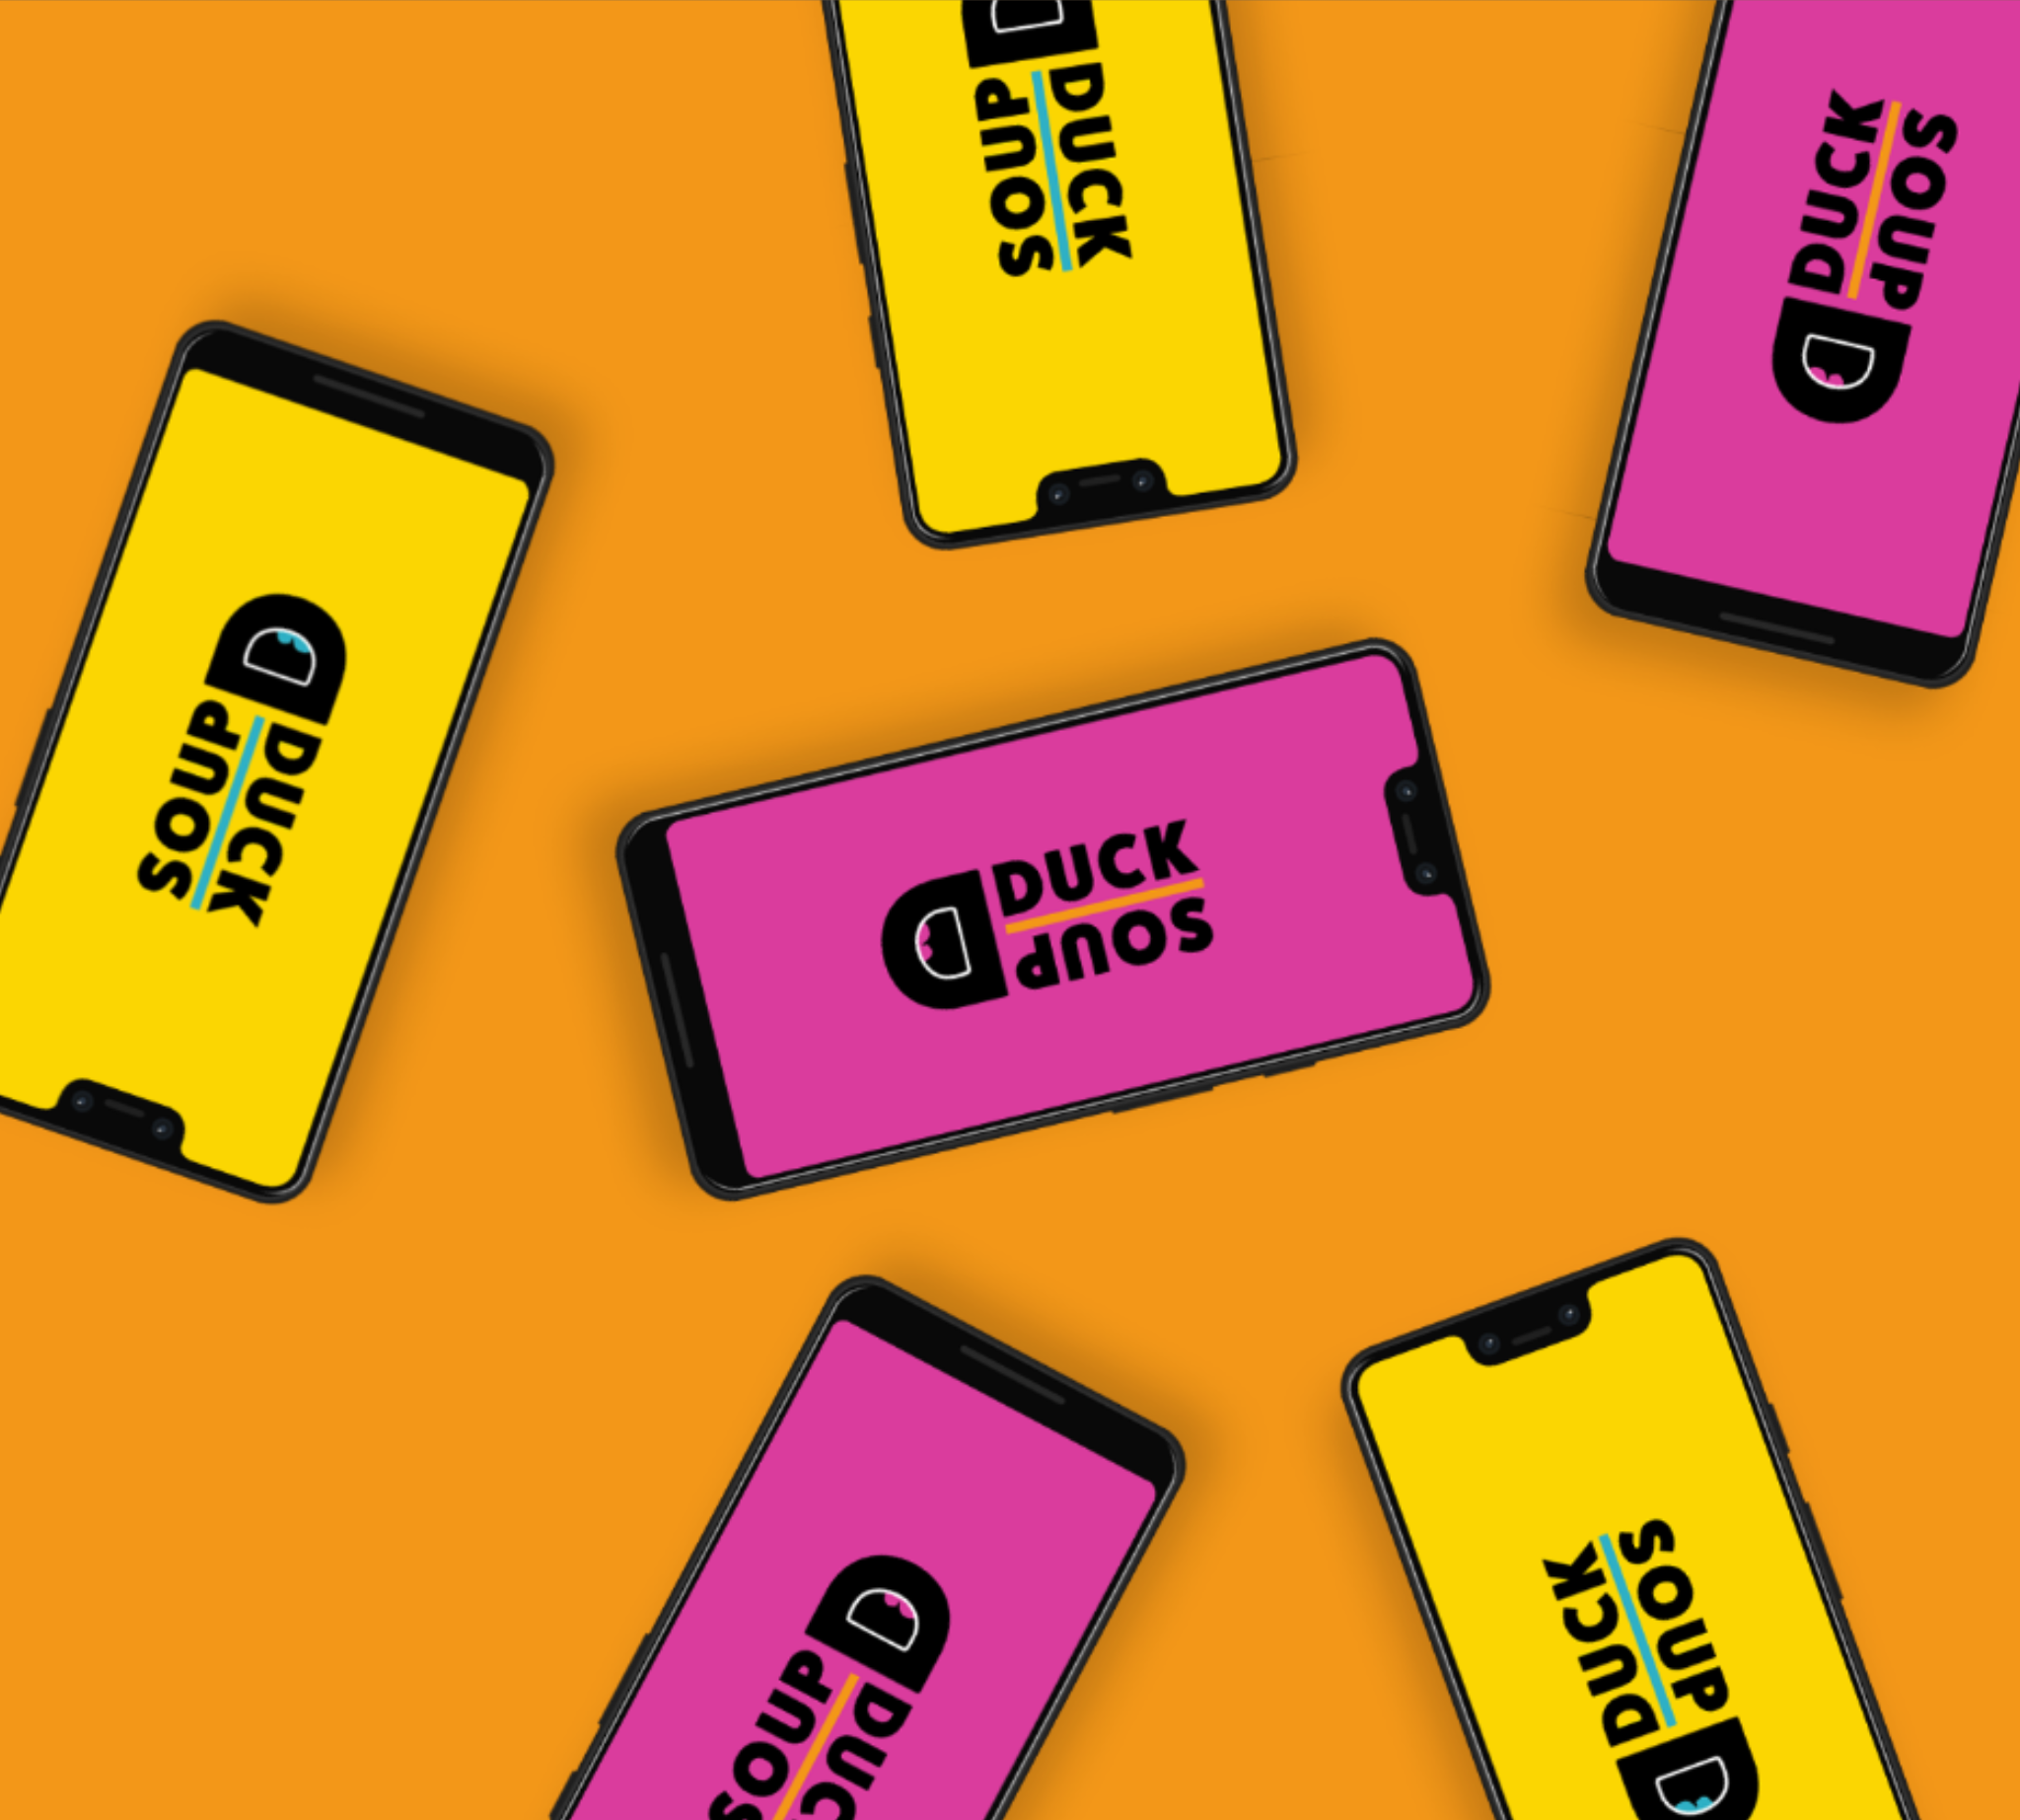 A mock-up of a 'Duck Soup' logo on pink and yellow backgrounds as an app on six phones